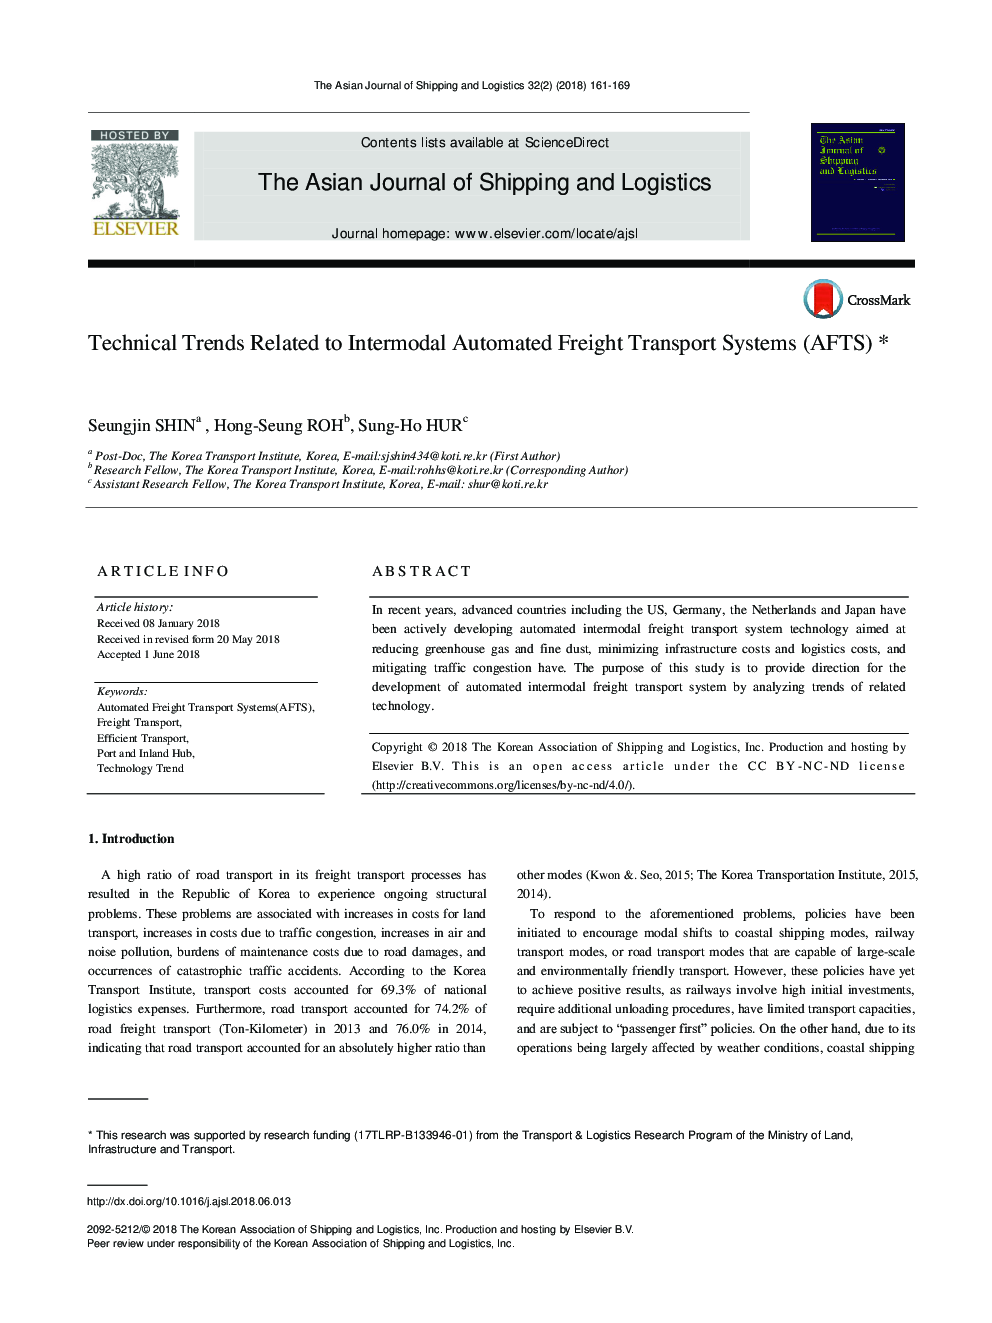 Technical Trends Related to Intermodal Automated Freight Transport Systems (AFTS) *